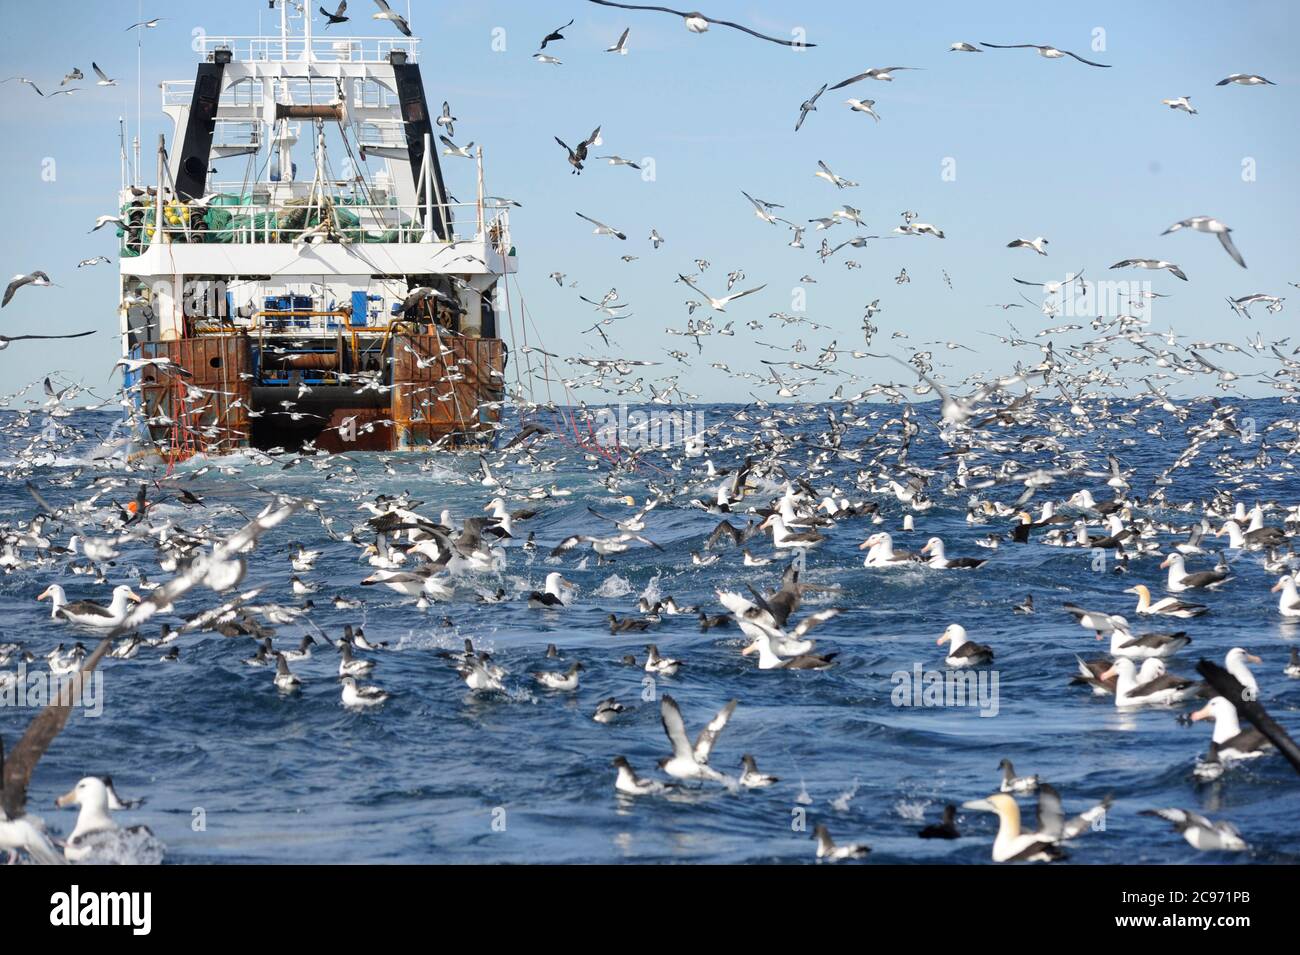 Trawler and huge flock of seabirds of the South African coast in the Atlantic Ocean. Many petrels, shearwaters and albatrosses flying around and swimming on the surface., South Africa Stock Photo